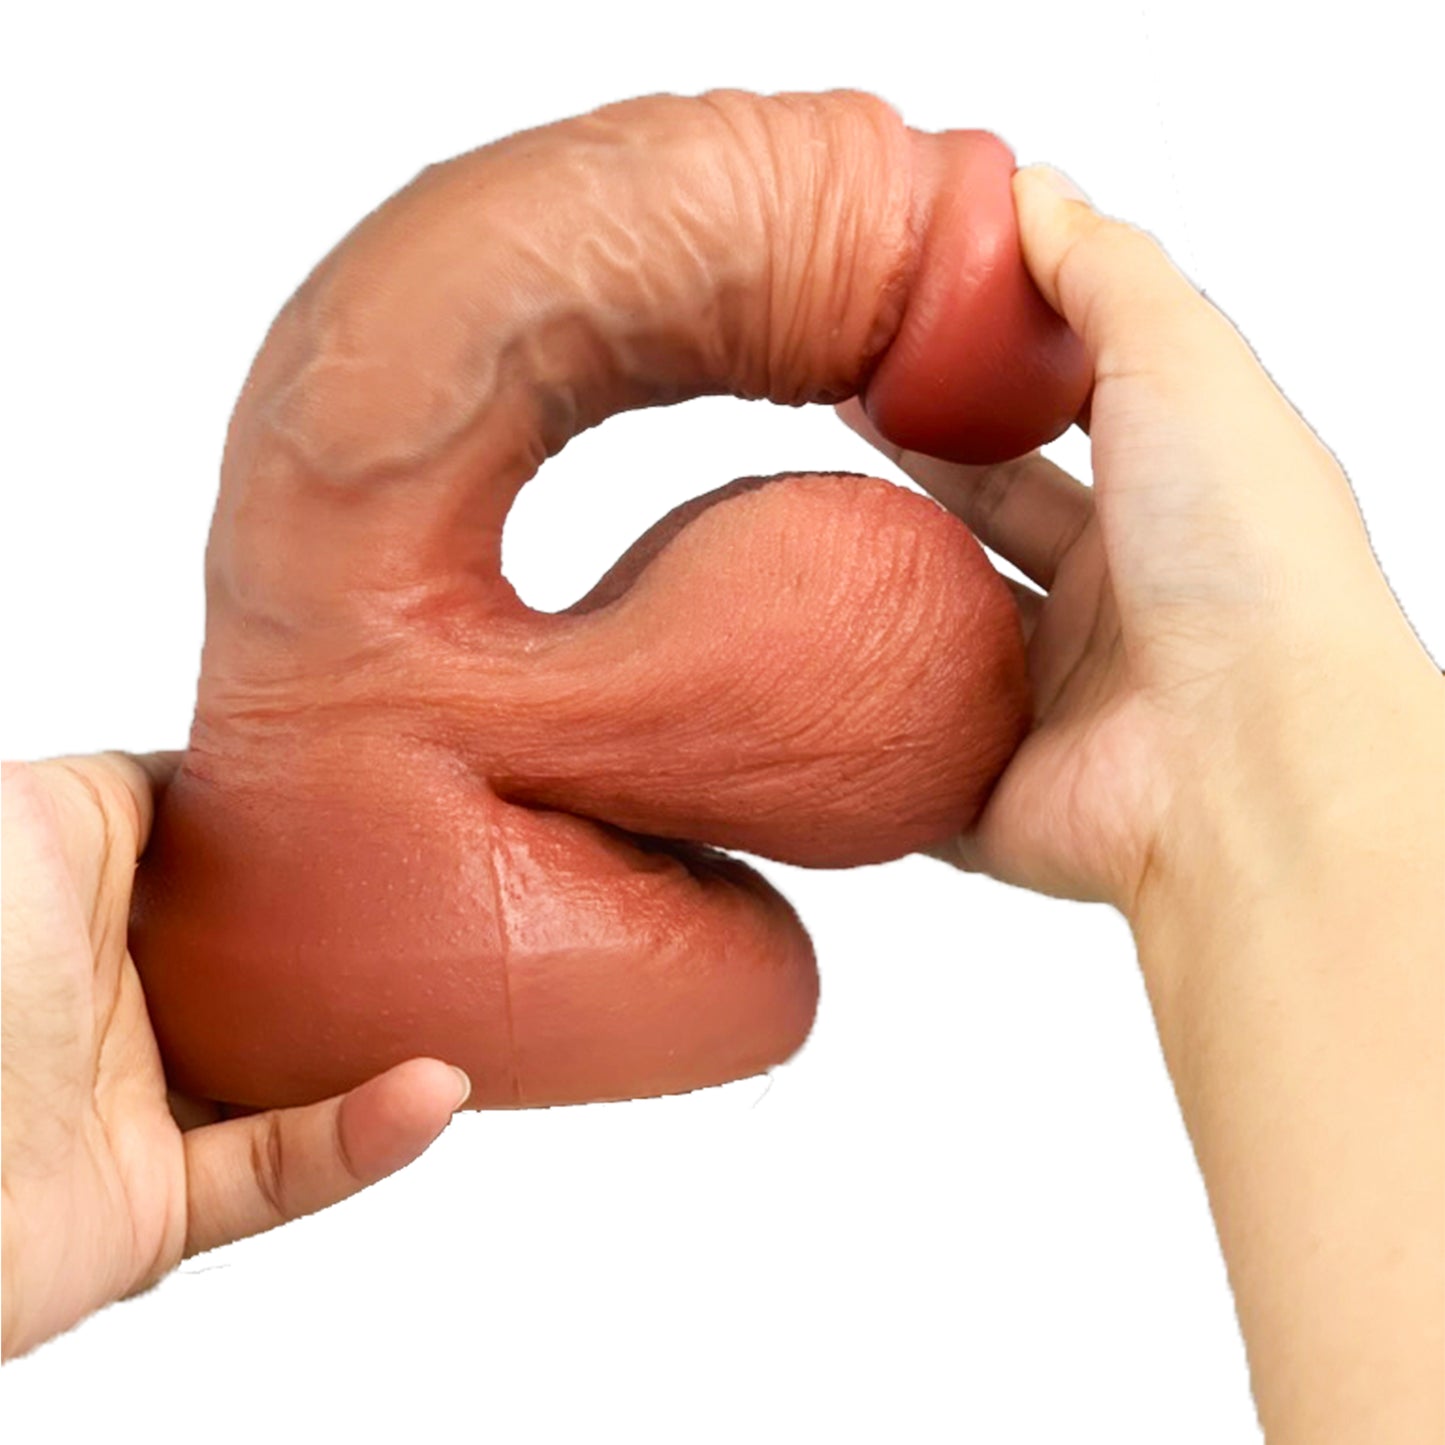 Huge Realistic Dildos - Lifelike Tentacle Glans Big Suction Cup Sex Toys for Women